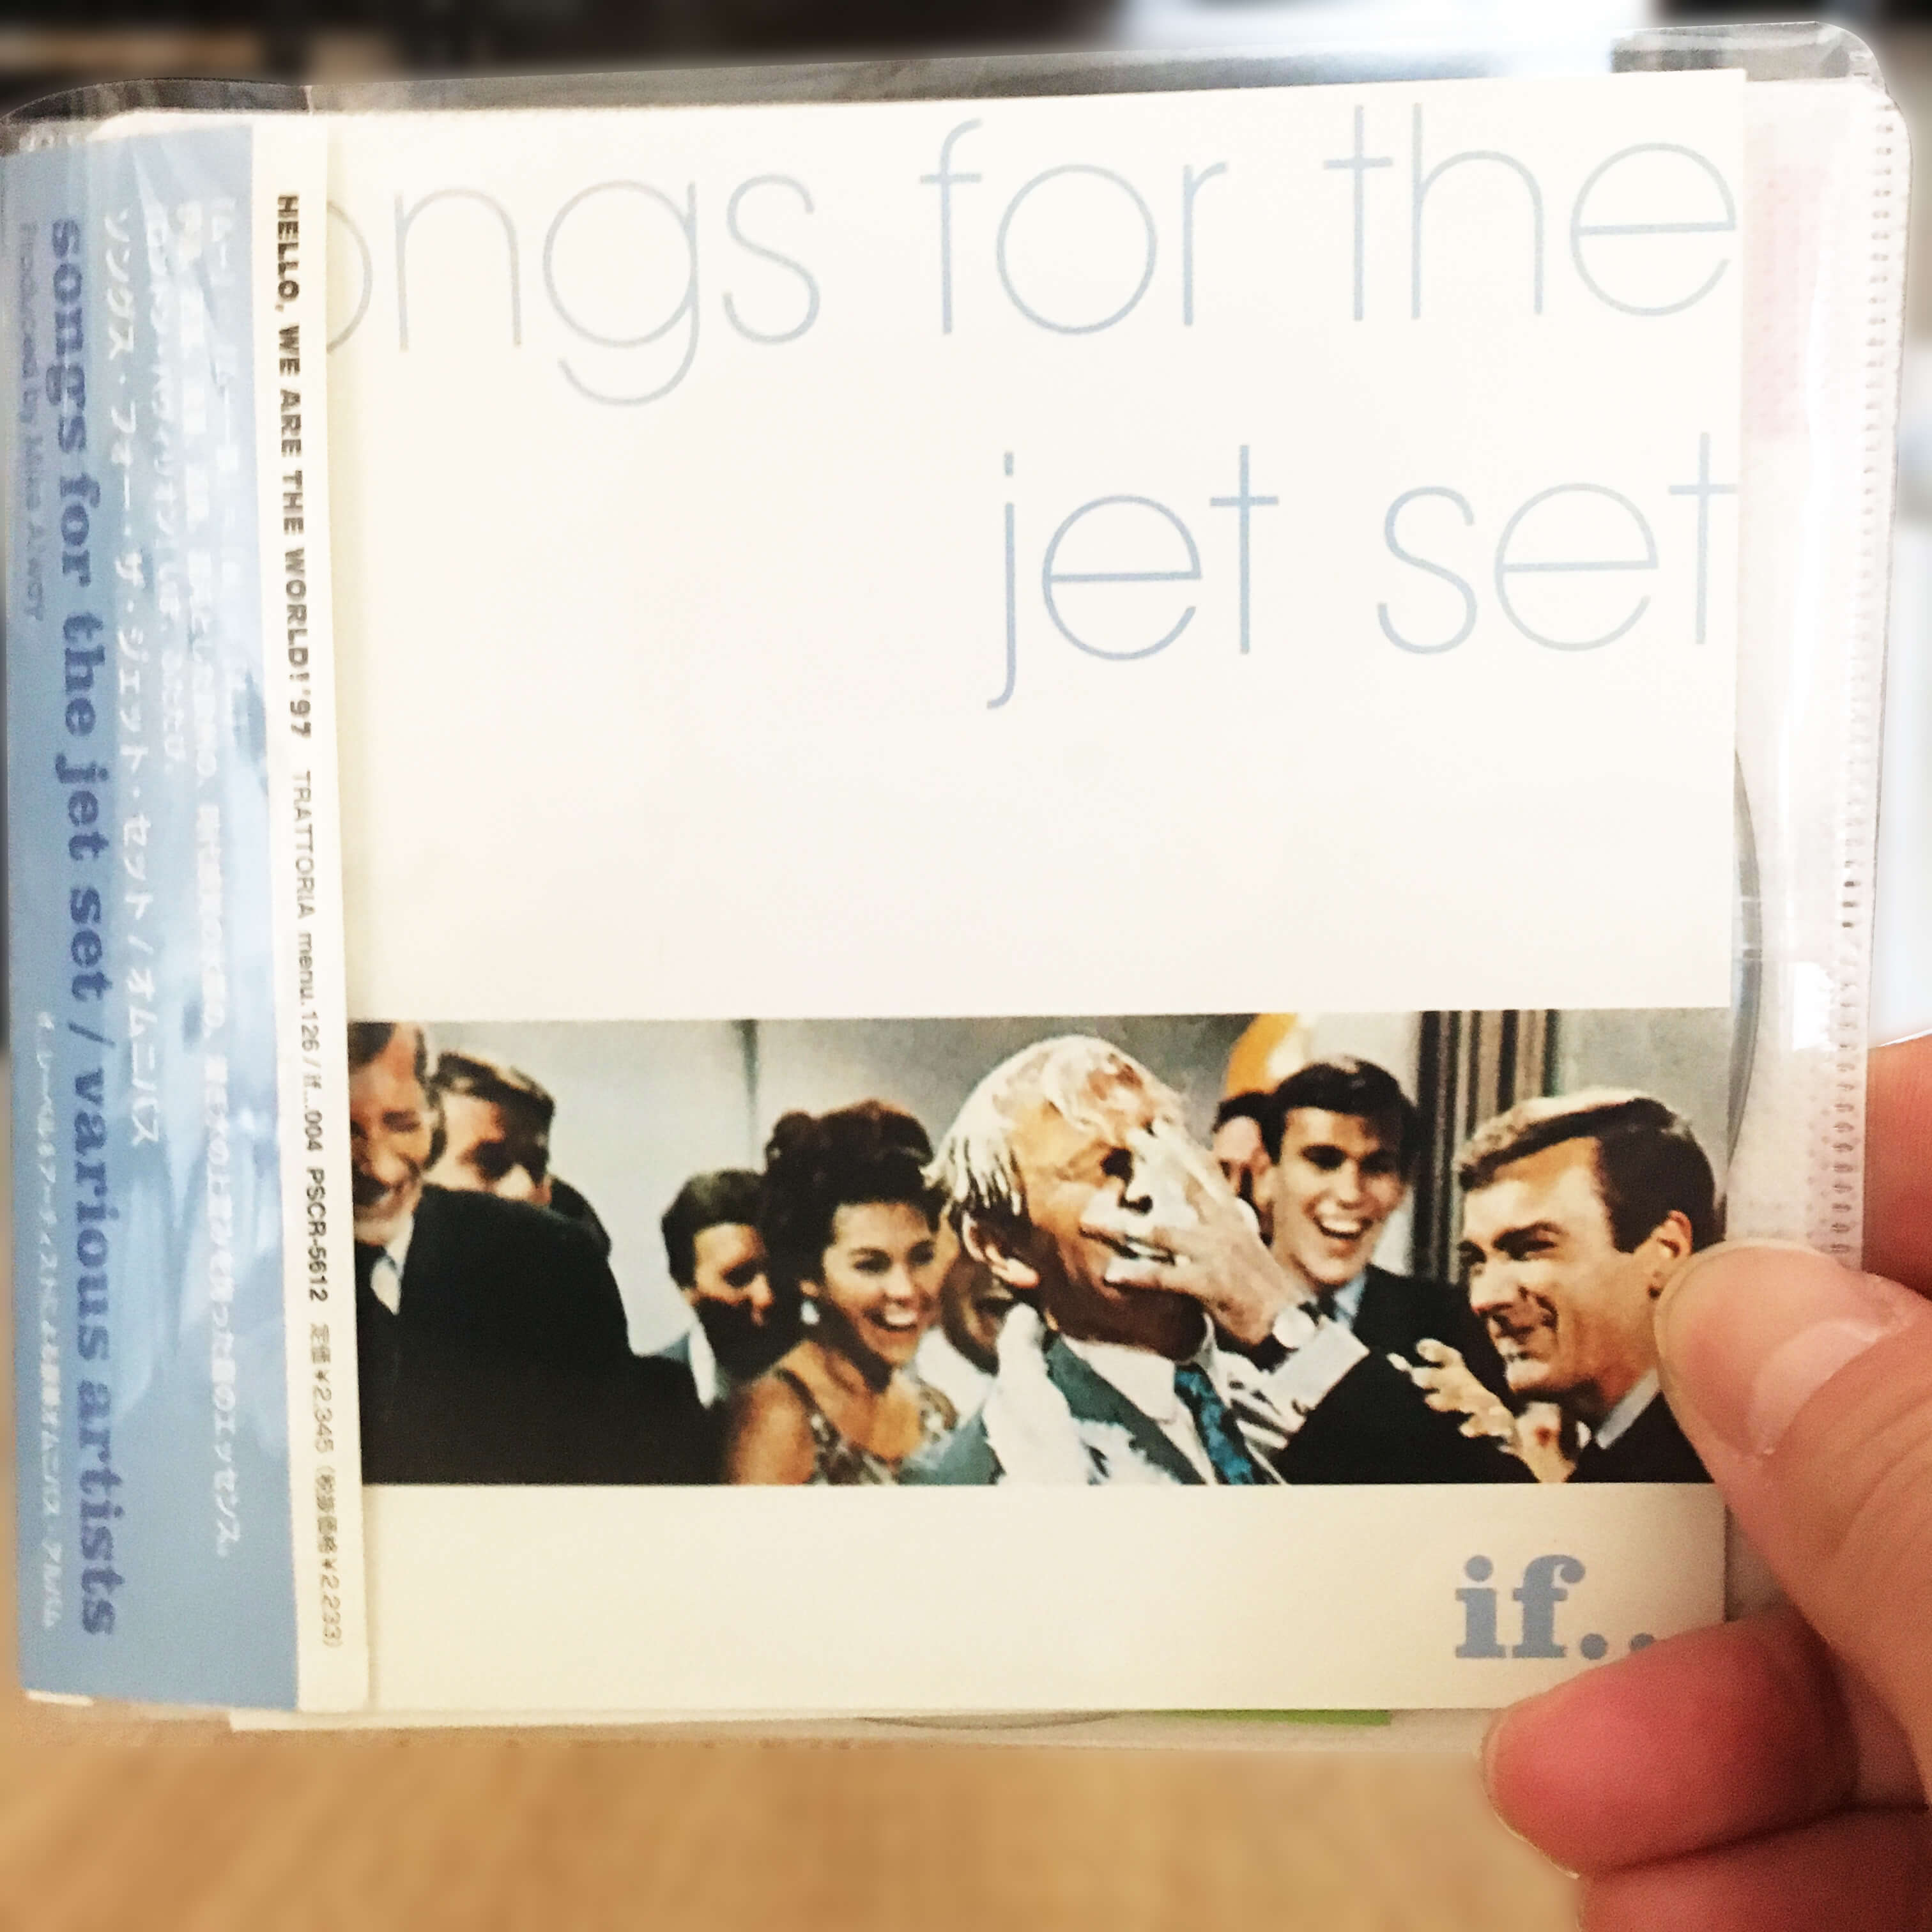 Songs For The Jet Set